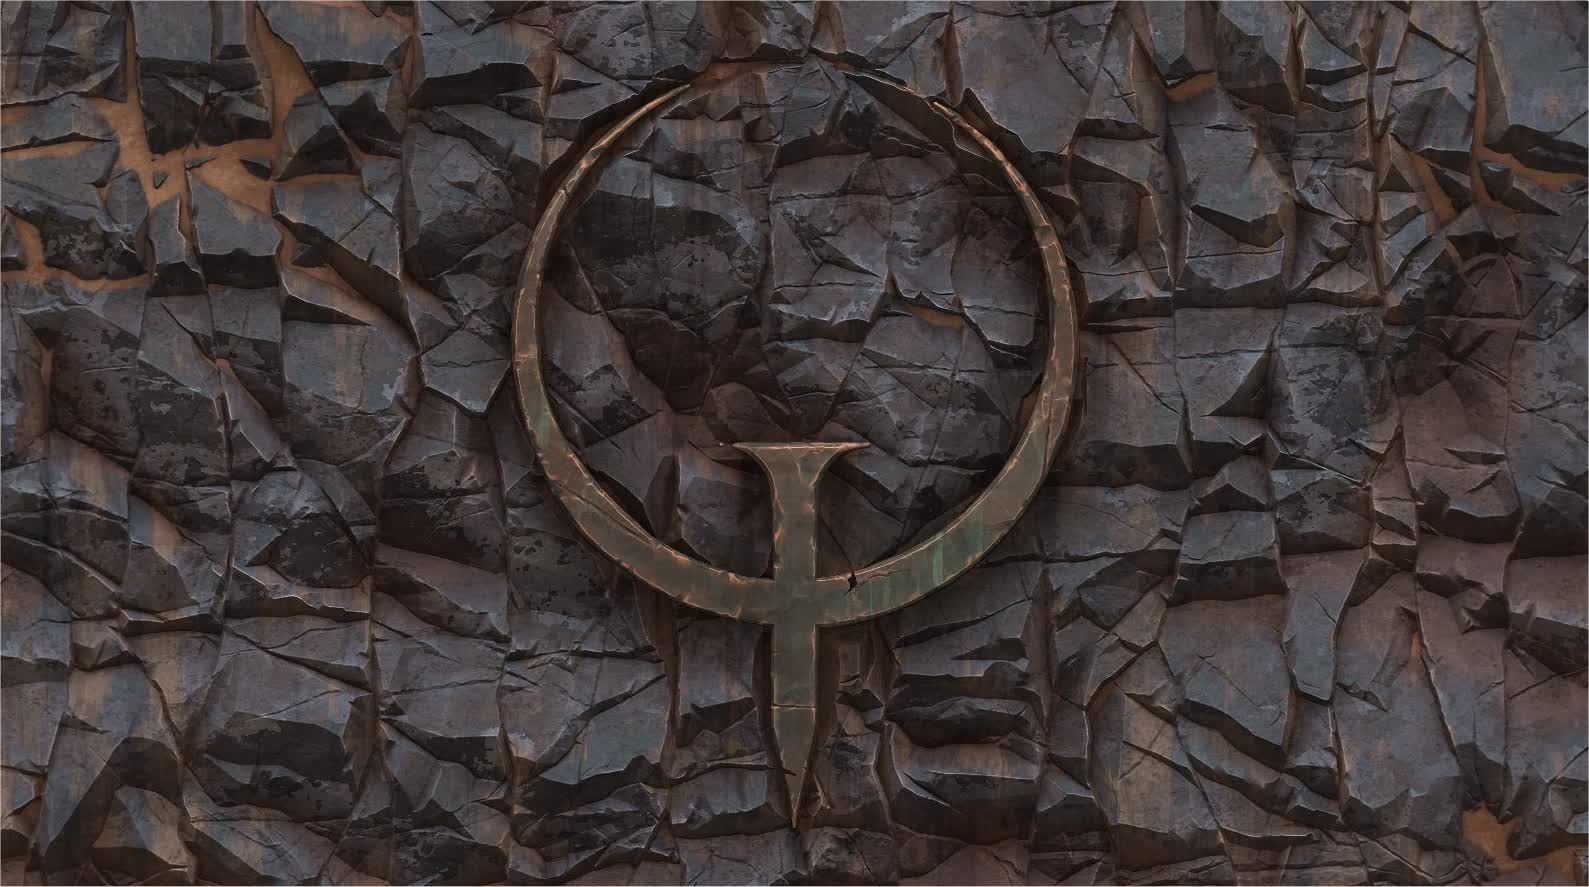 New Quake map pack remixes multiplayer levels from Doom, Mario Kart, and more